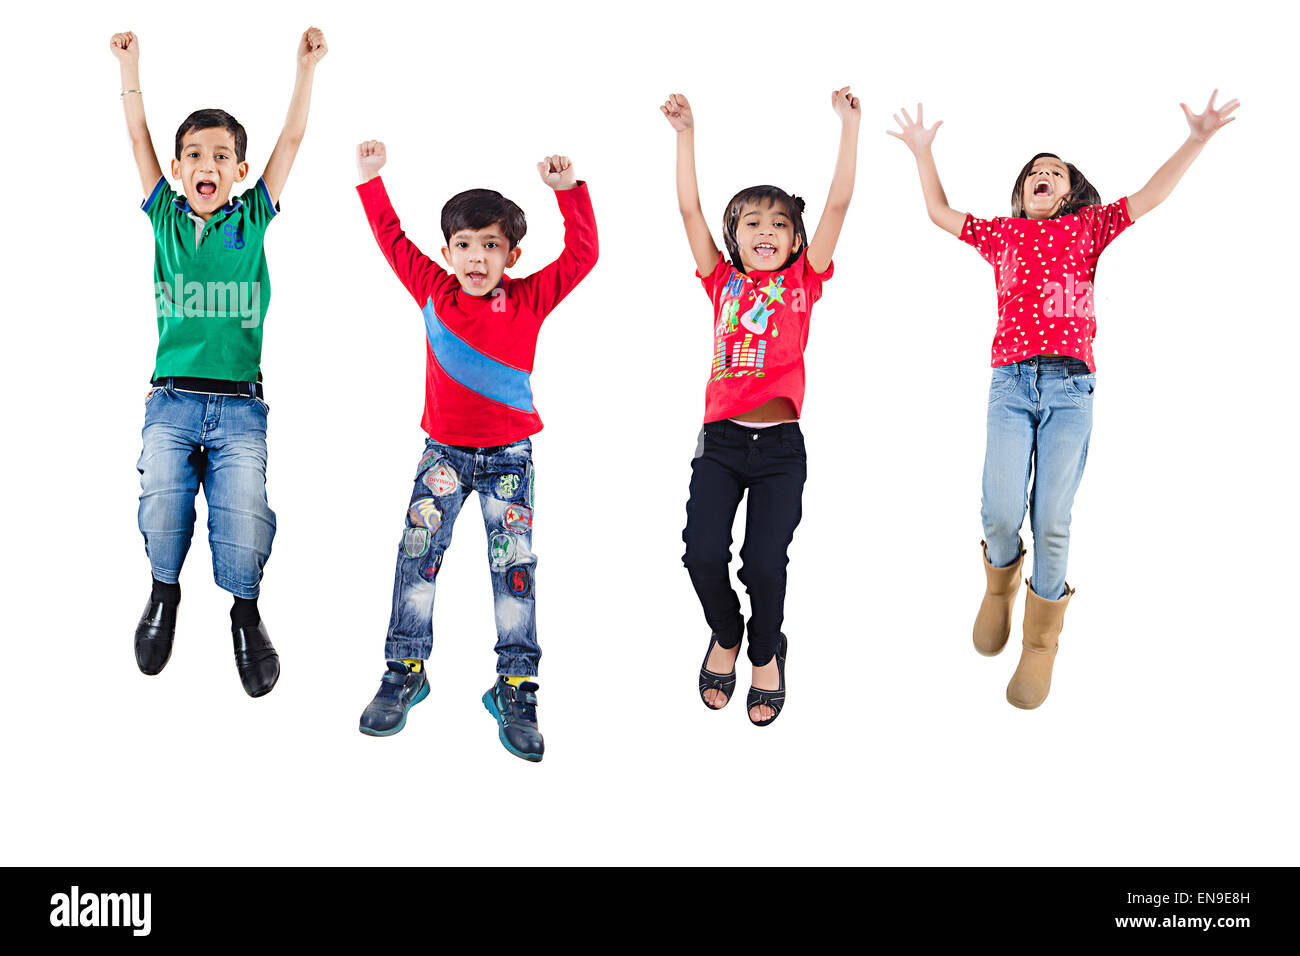 4 indian indian Kids Friends Jumping Stock Photo